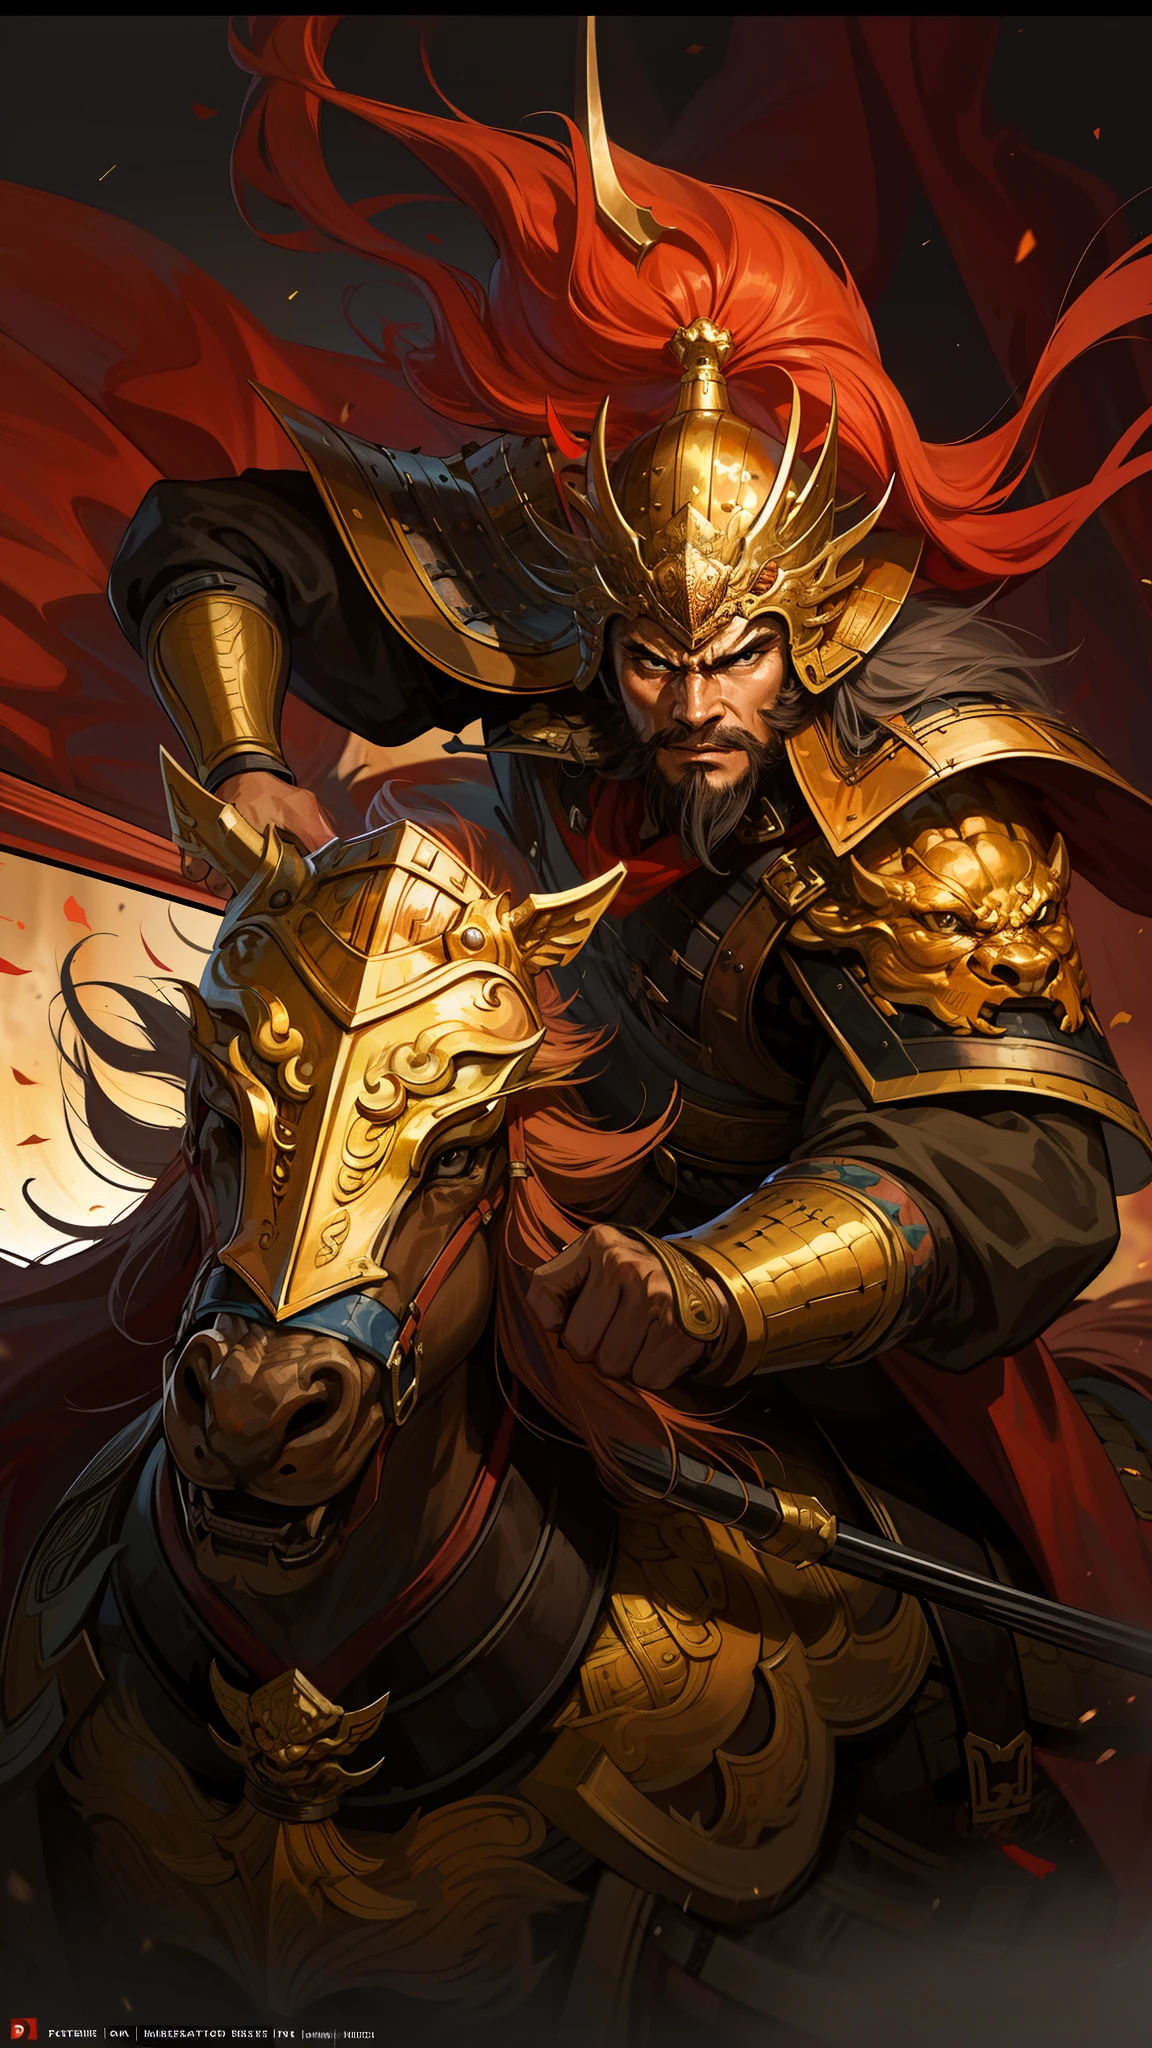 (4k,   best quality, highres:1.1), (masterpiece:1.1),   man, (Chinese male:1.2), middle-aged, warrior, detailed eyes, facial hair, muscular, strong, brave, courageous, powerful, honorable, disciplined, confident, looking at viewer,
face, bracer, helmet, armor, holding weapon, riding, horse, black, red,